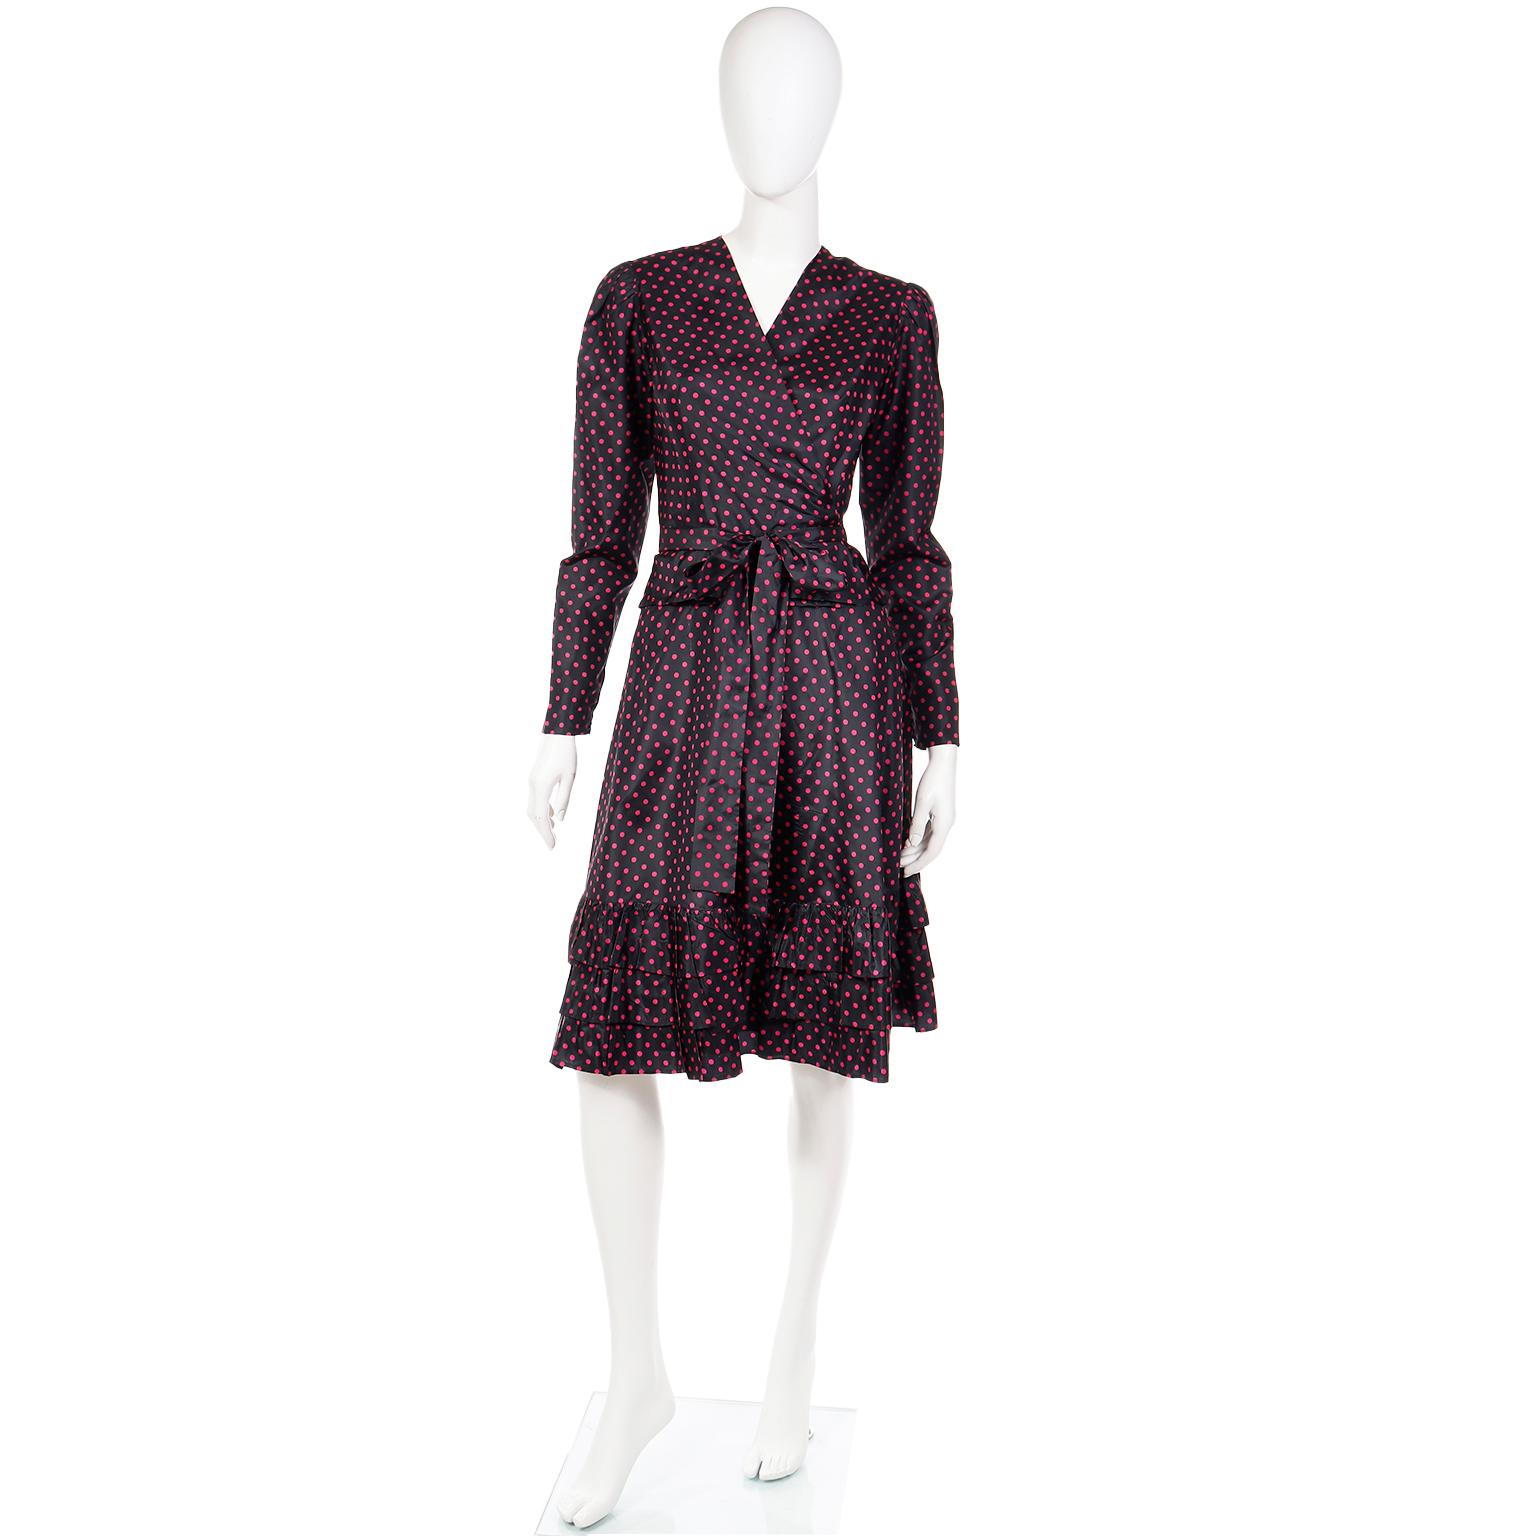 This is a lovely vintage Yves Saint Laurent late 1970's or early 1980's 2 piece dress in a luxe black taffeta with pink polka dots. This dress can be worn during the day or evening depending on the accessories.

This outfit includes a wrap top with